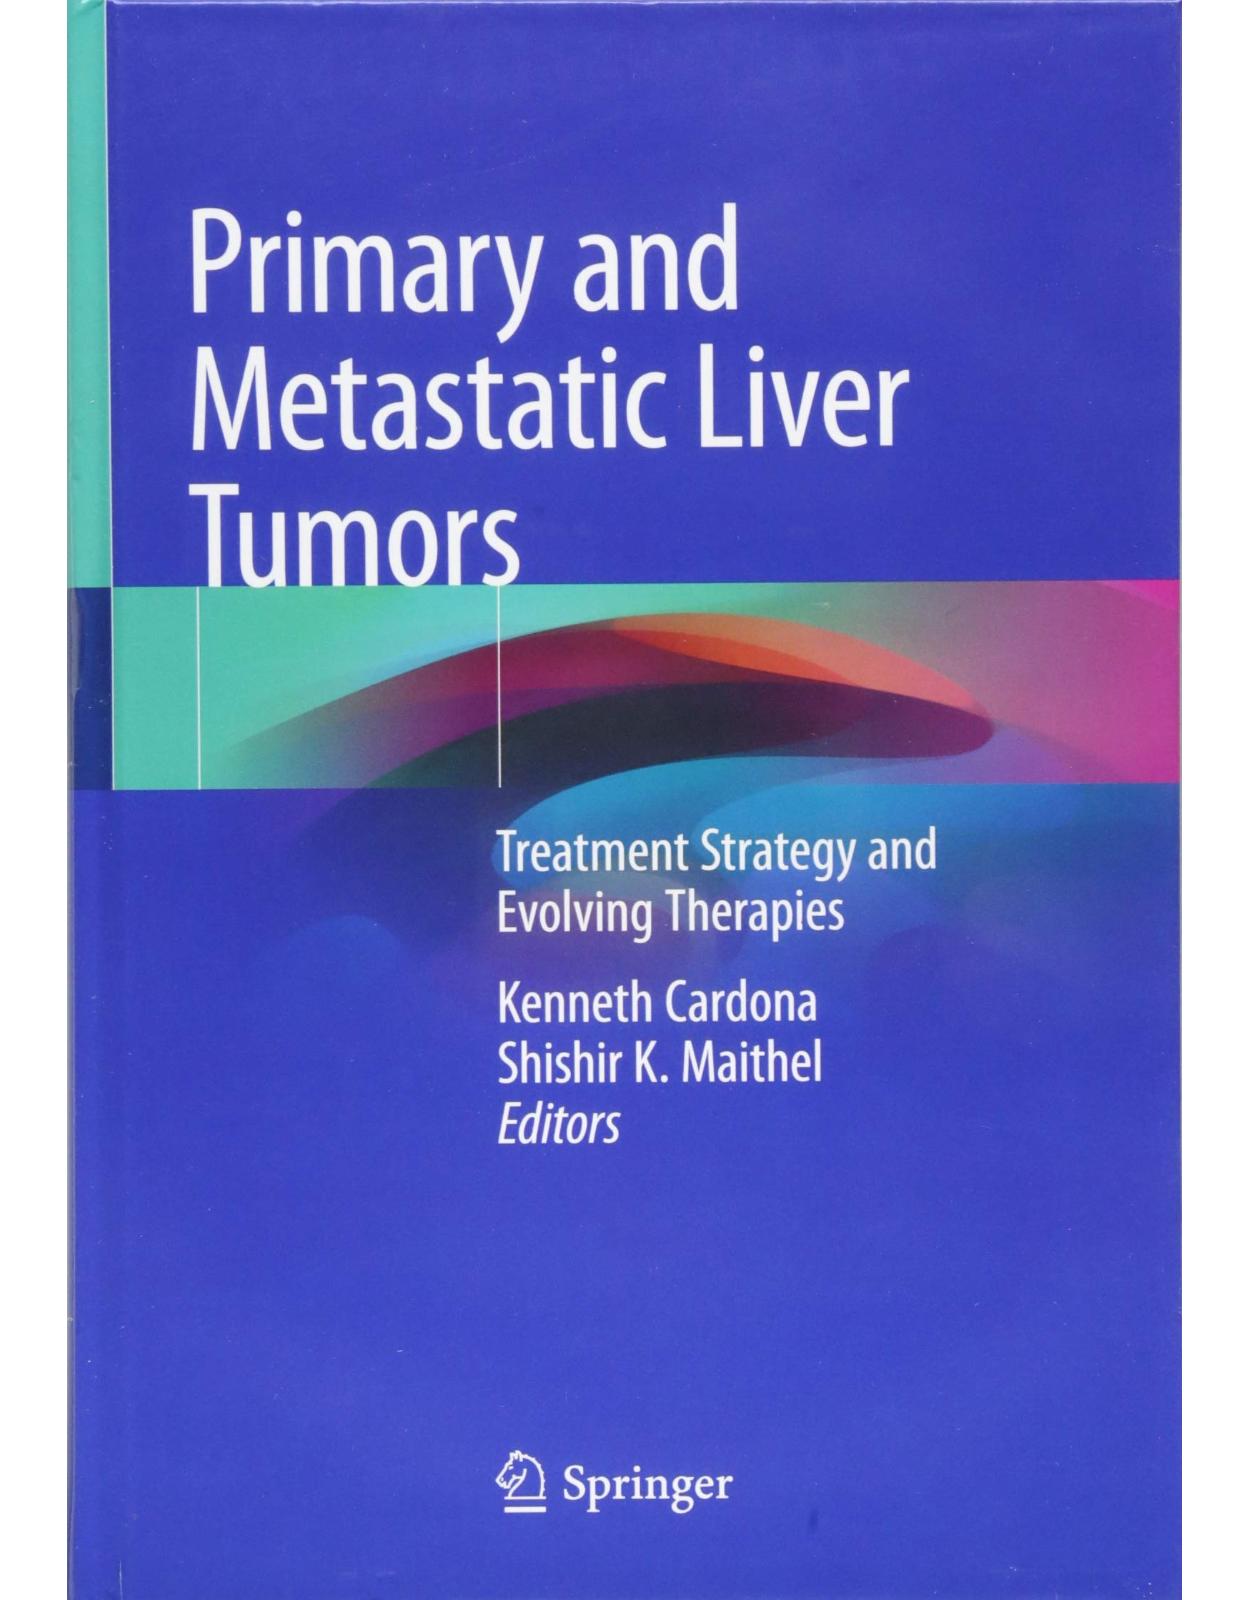 Primary and Metastatic Liver Tumors: Treatment Strategy and Evolving Therapies